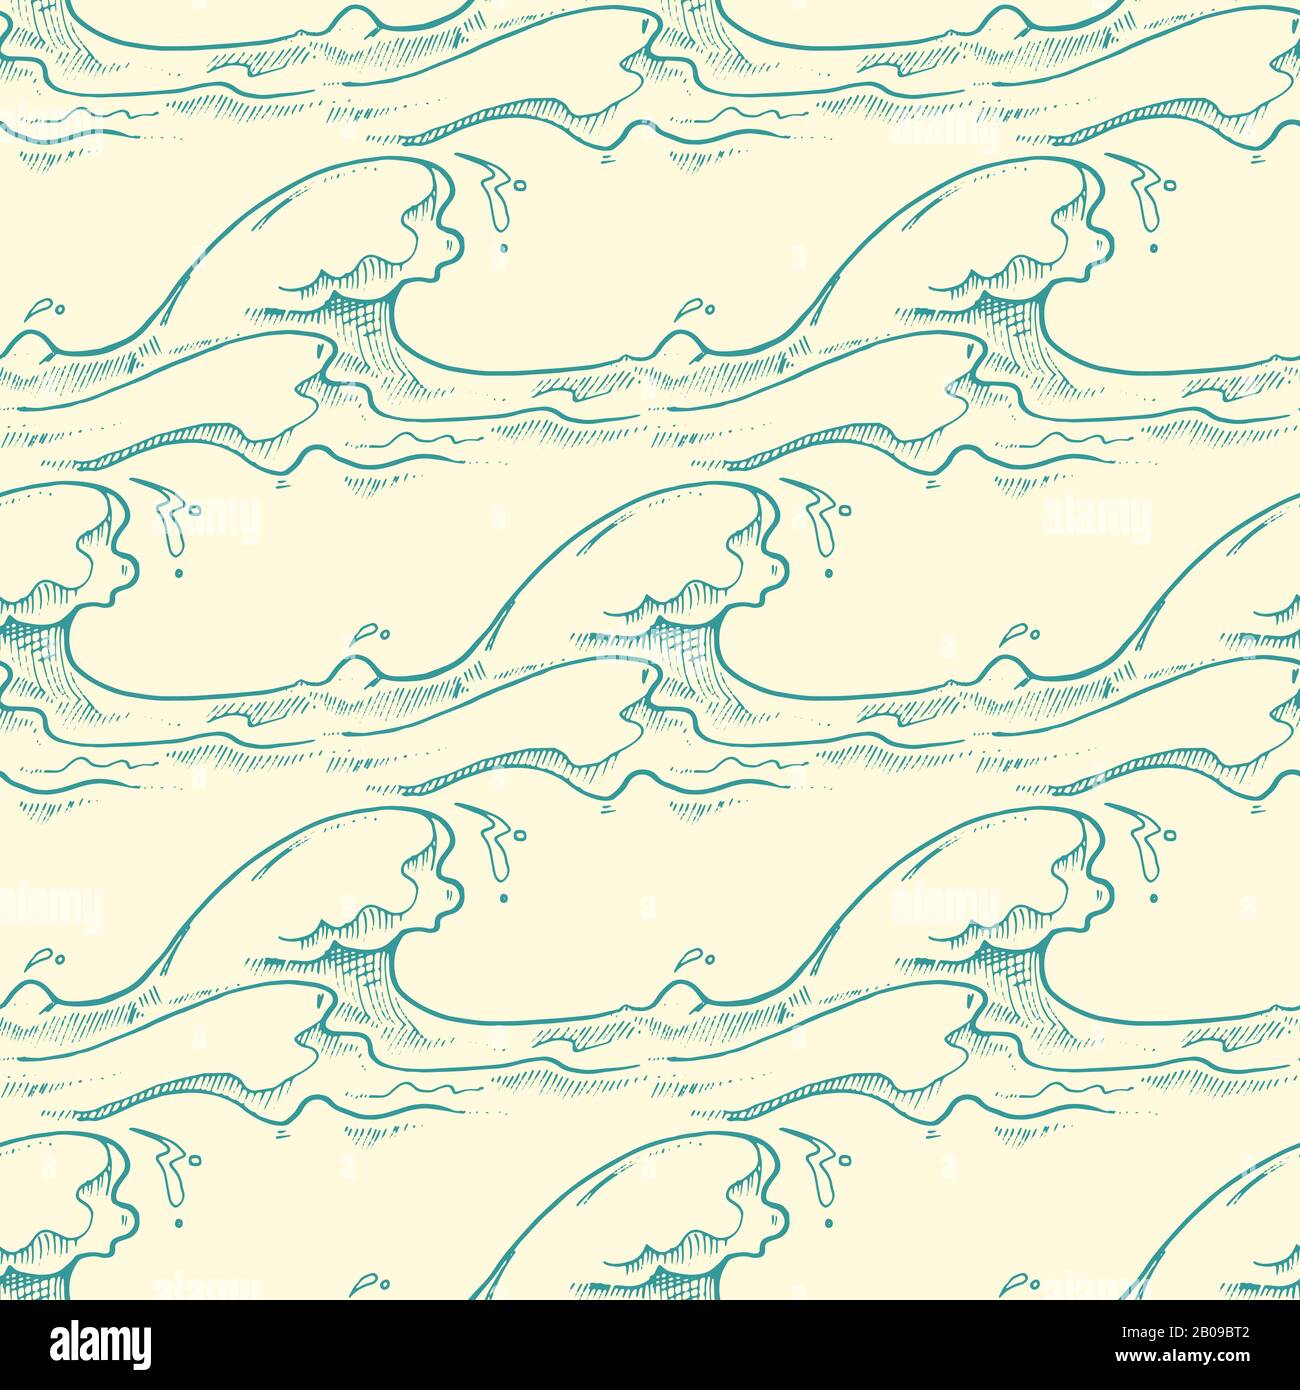 Green hand drawn waves vector seamless pattern. Line ocean background illustration Stock Vector